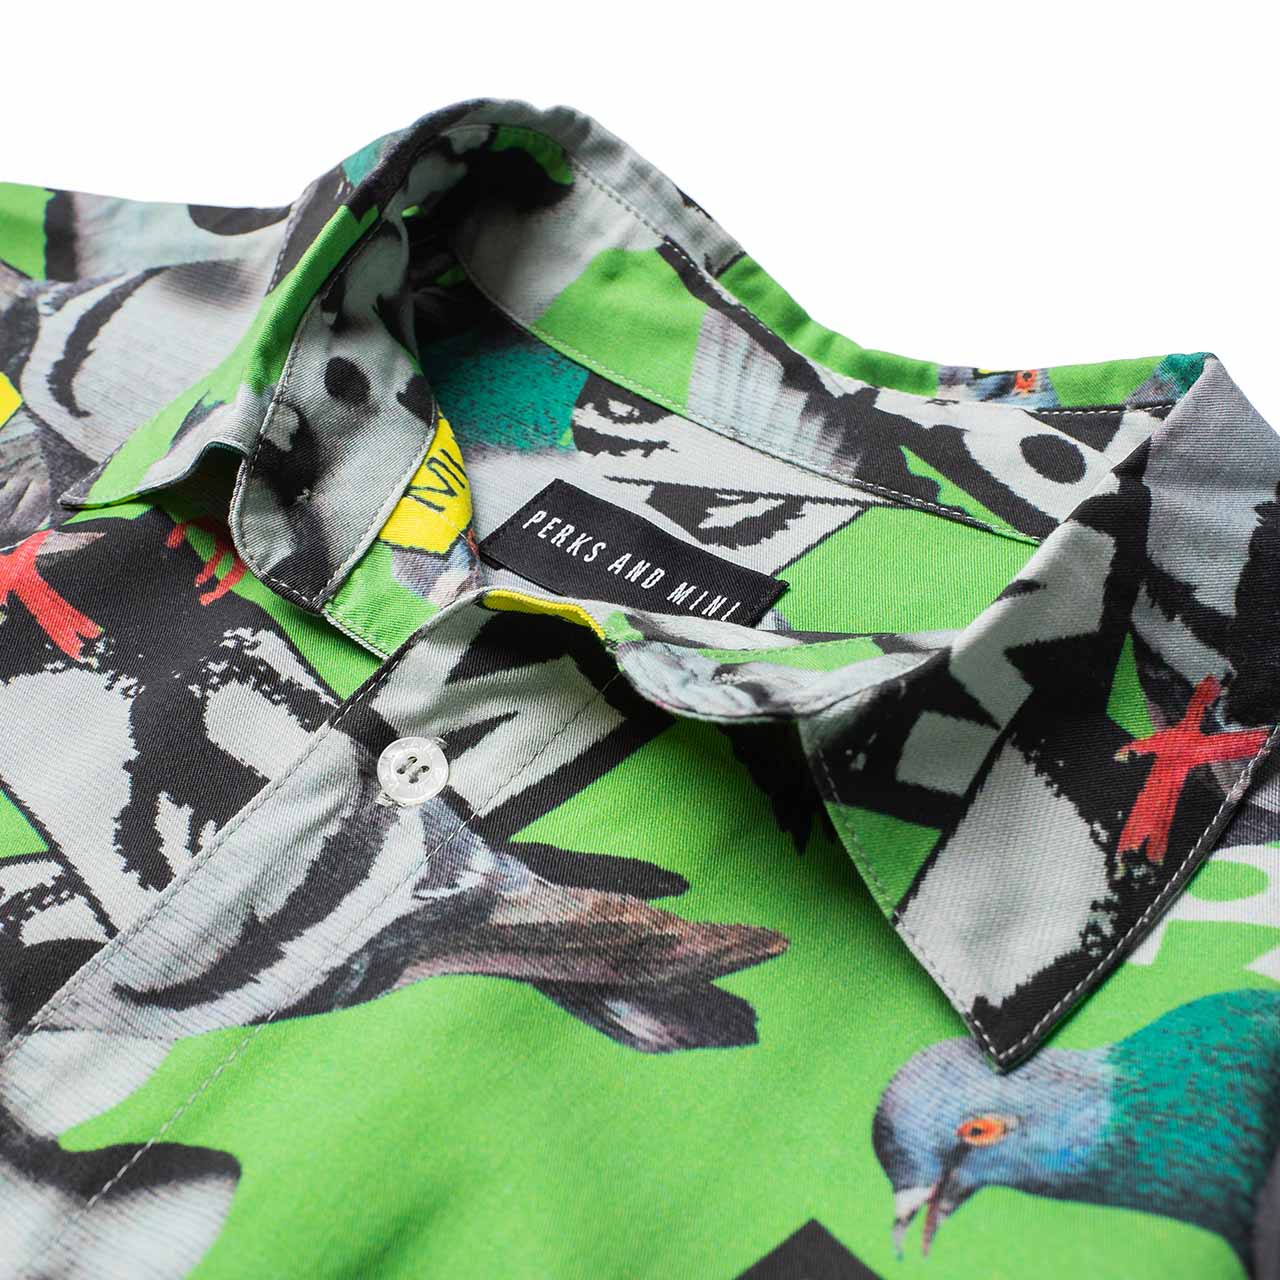 perks and mini collage short sleeve shirt (green) - 3597-cpdg - a.plus - Image - 4